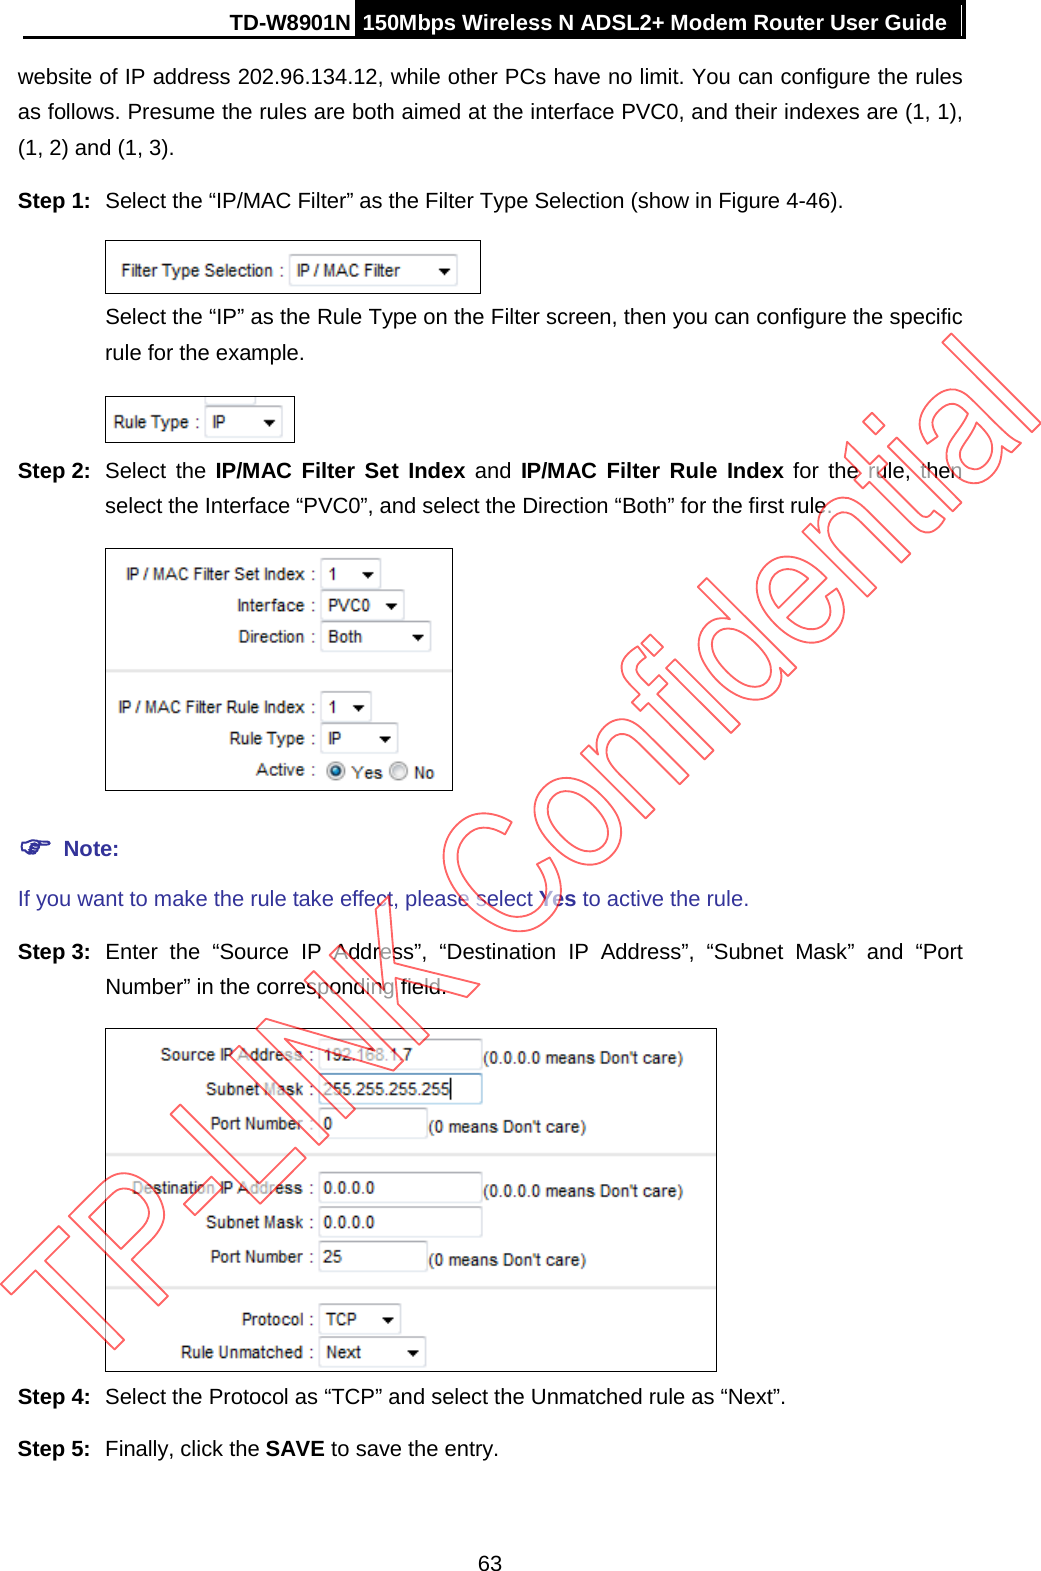 TD-W8901N 150Mbps Wireless N ADSL2+ Modem Router User Guide  website of IP address 202.96.134.12, while other PCs have no limit. You can configure the rules as follows. Presume the rules are both aimed at the interface PVC0, and their indexes are (1, 1), (1, 2) and (1, 3). Step 1: Select the “IP/MAC Filter” as the Filter Type Selection (show in Figure 4-46).  Select the “IP” as the Rule Type on the Filter screen, then you can configure the specific rule for the example.  Step 2: Select the IP/MAC Filter Set Index and IP/MAC Filter Rule Index for the rule,  then select the Interface “PVC0”, and select the Direction “Both” for the first rule.   Note: If you want to make the rule take effect, please select Yes to active the rule. Step 3: Enter the “Source IP Address”, “Destination  IP Address”,  “Subnet Mask” and  “Port Number” in the corresponding field.  Step 4: Select the Protocol as “TCP” and select the Unmatched rule as “Next”. Step 5: Finally, click the SAVE to save the entry. 63 